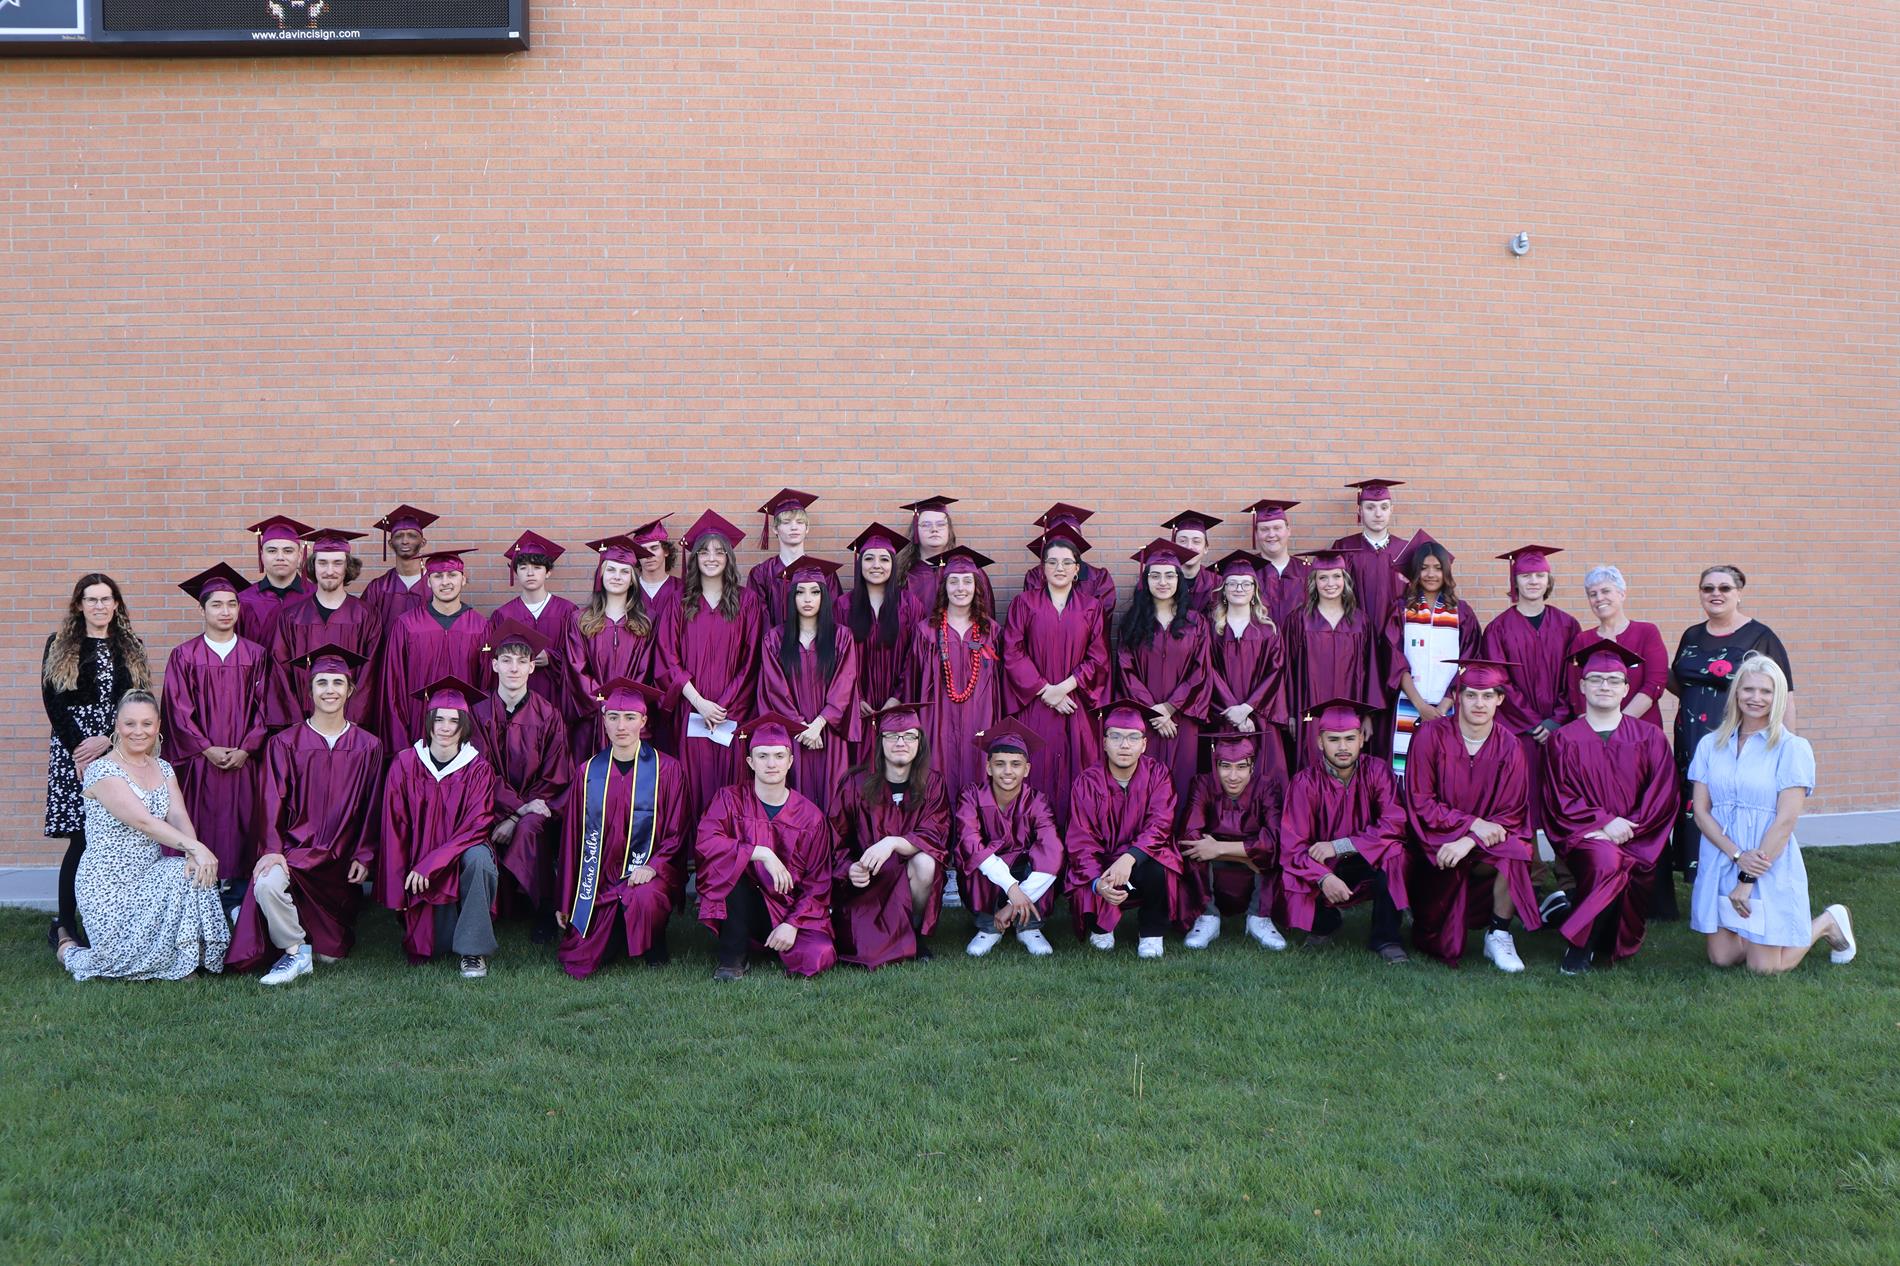 CBOCES High School Greeley Graduates in a group picture with their teachers standing next to them.